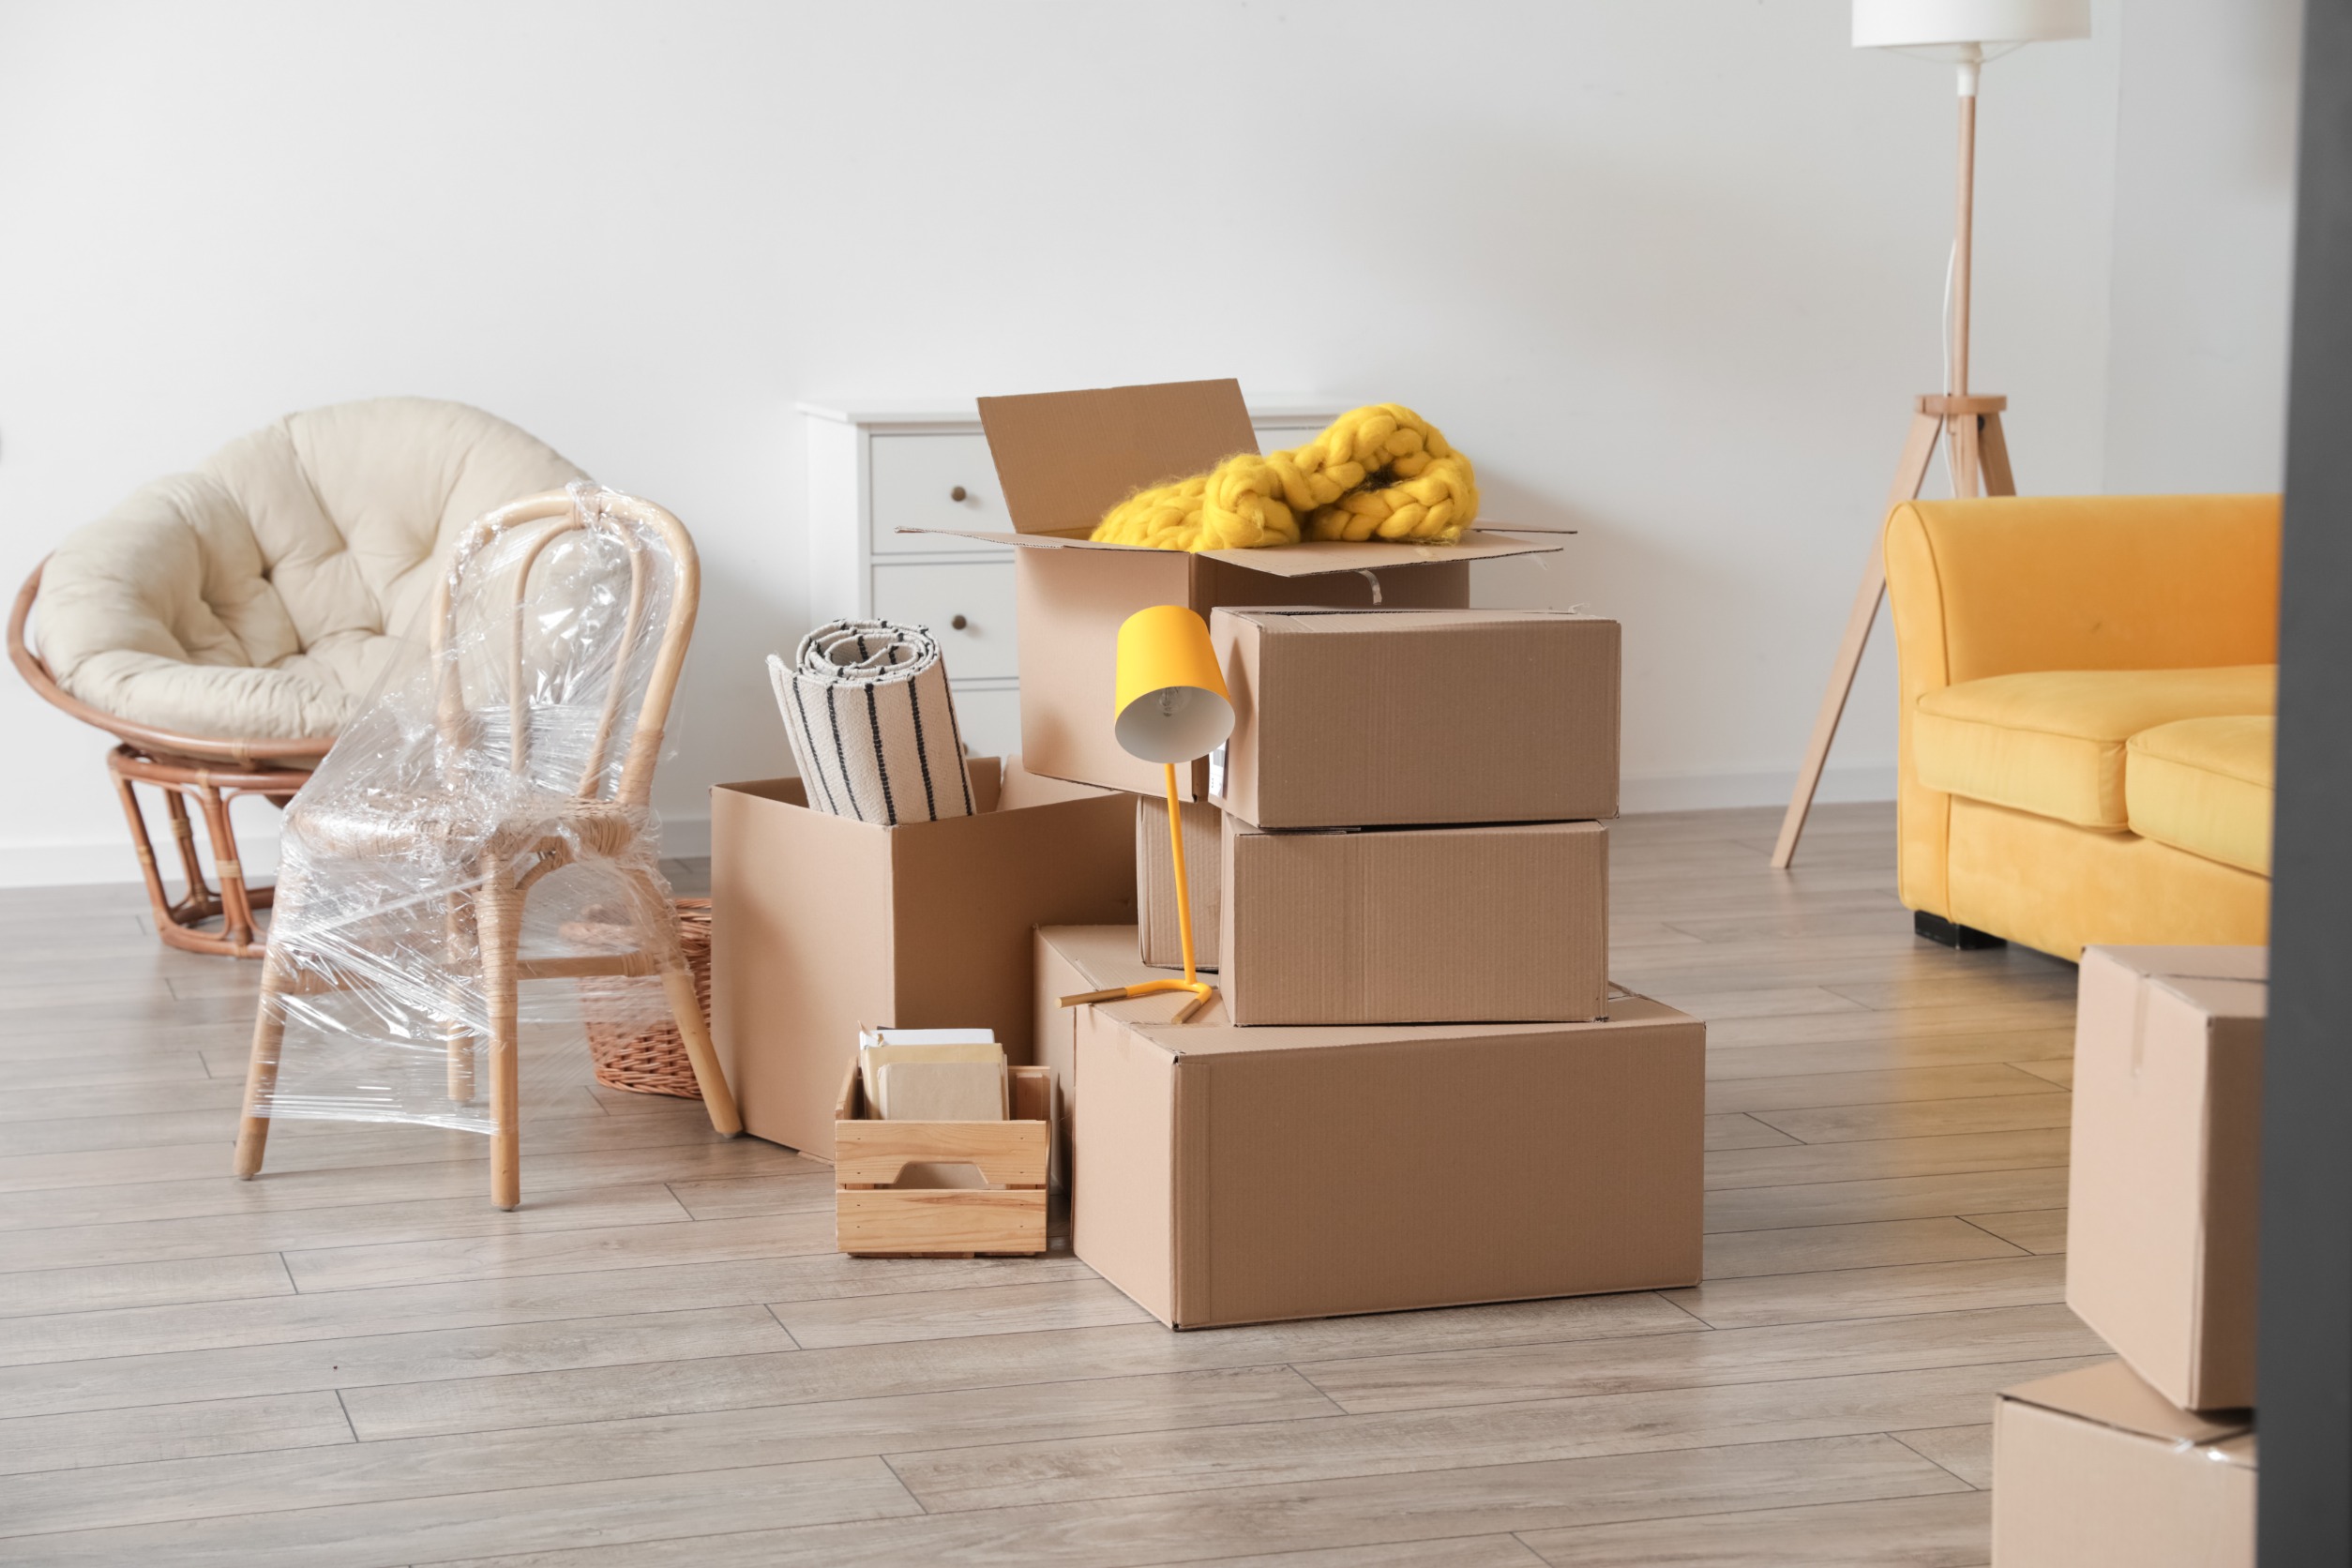 How to pack for moving house in Birmingham